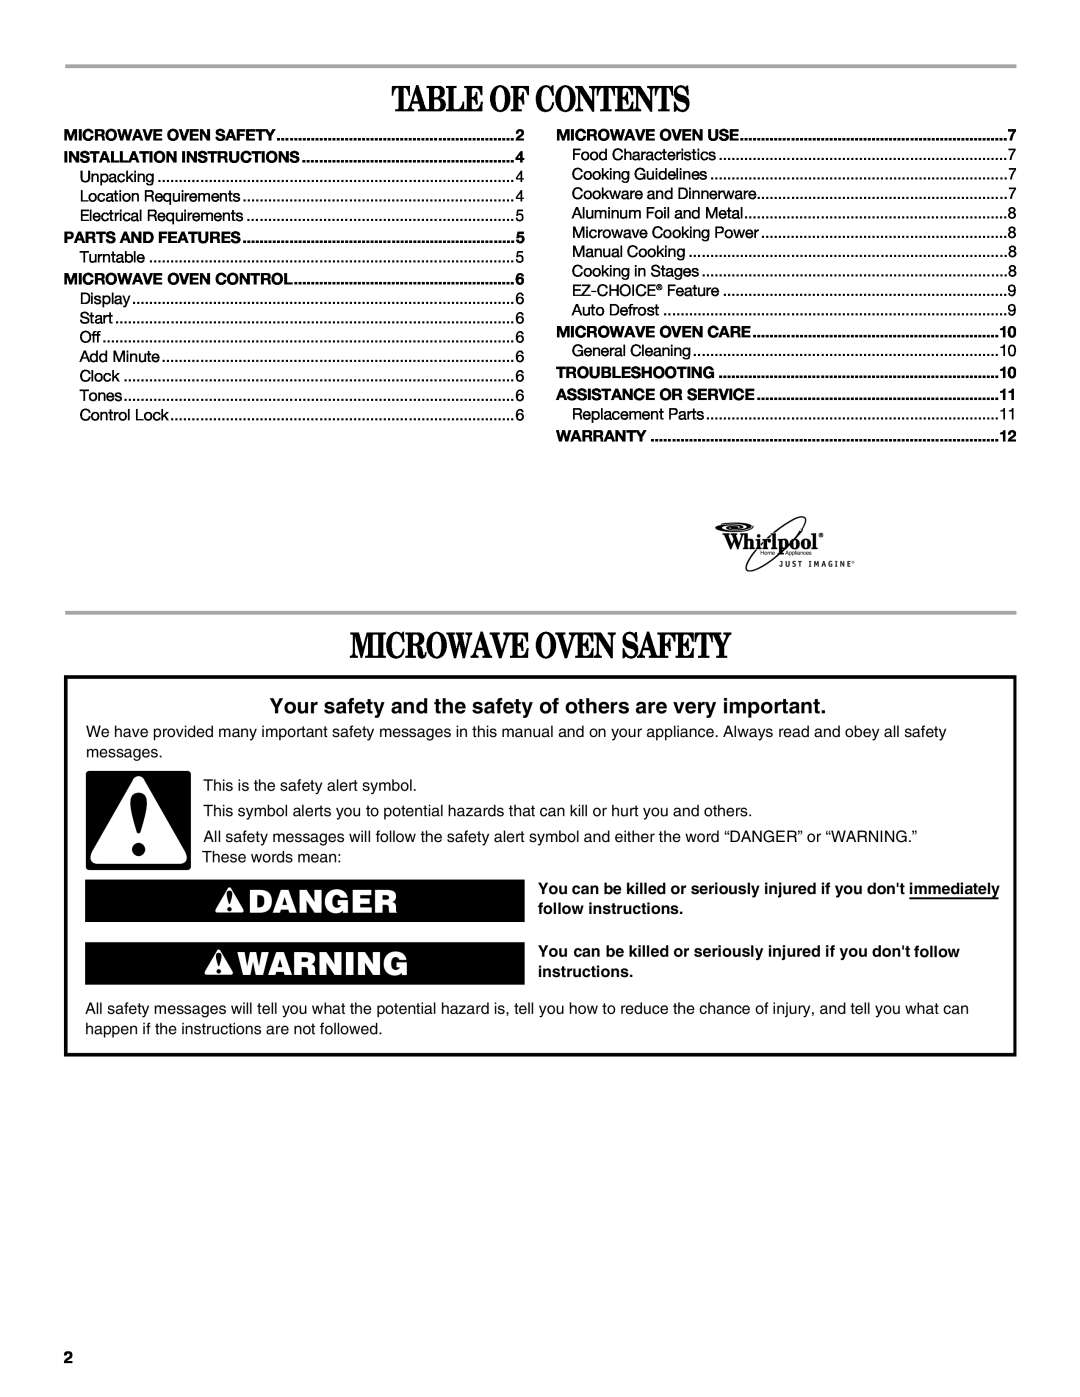 Whirlpool MT4078 Table Of Contents, Microwave Oven Safety, Danger, Your safety and the safety of others are very important 